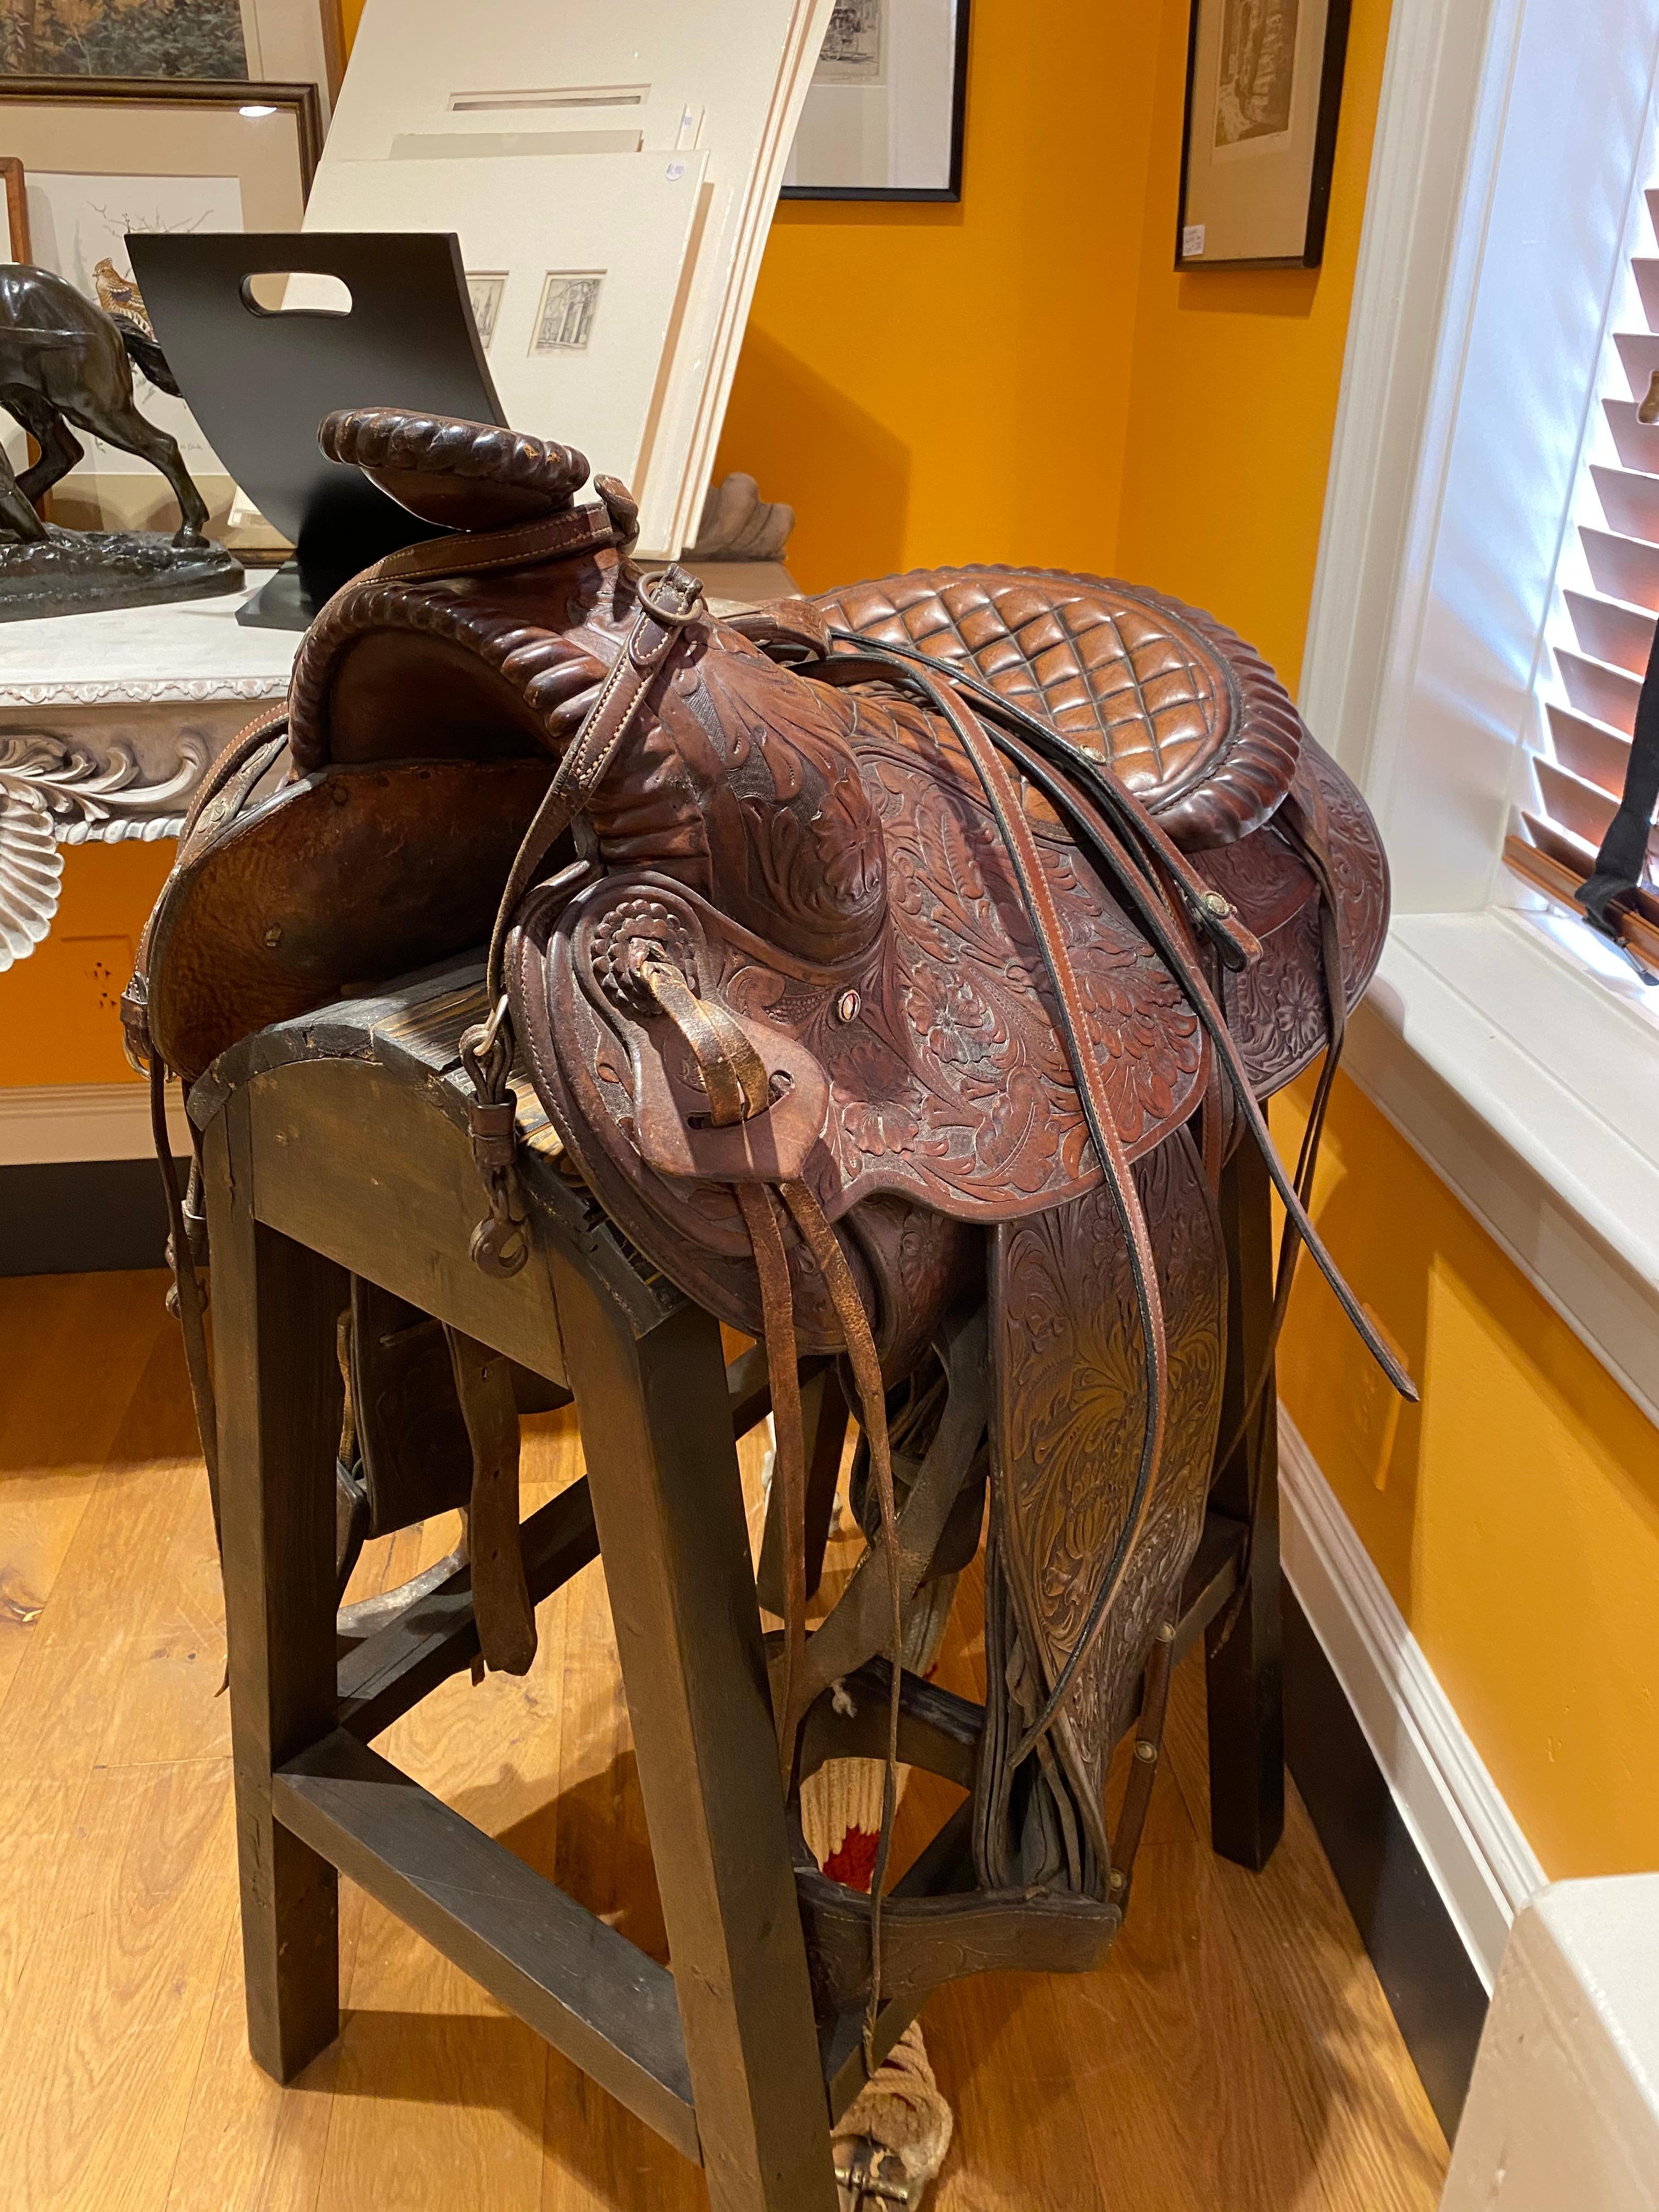 Karl’s of Seattle was owned by Karl L. Raab who employed one of the premier silversmiths on the west coast, Don Ellis (1913-1969), to manufacture mountings for their coveted line of parade saddles.